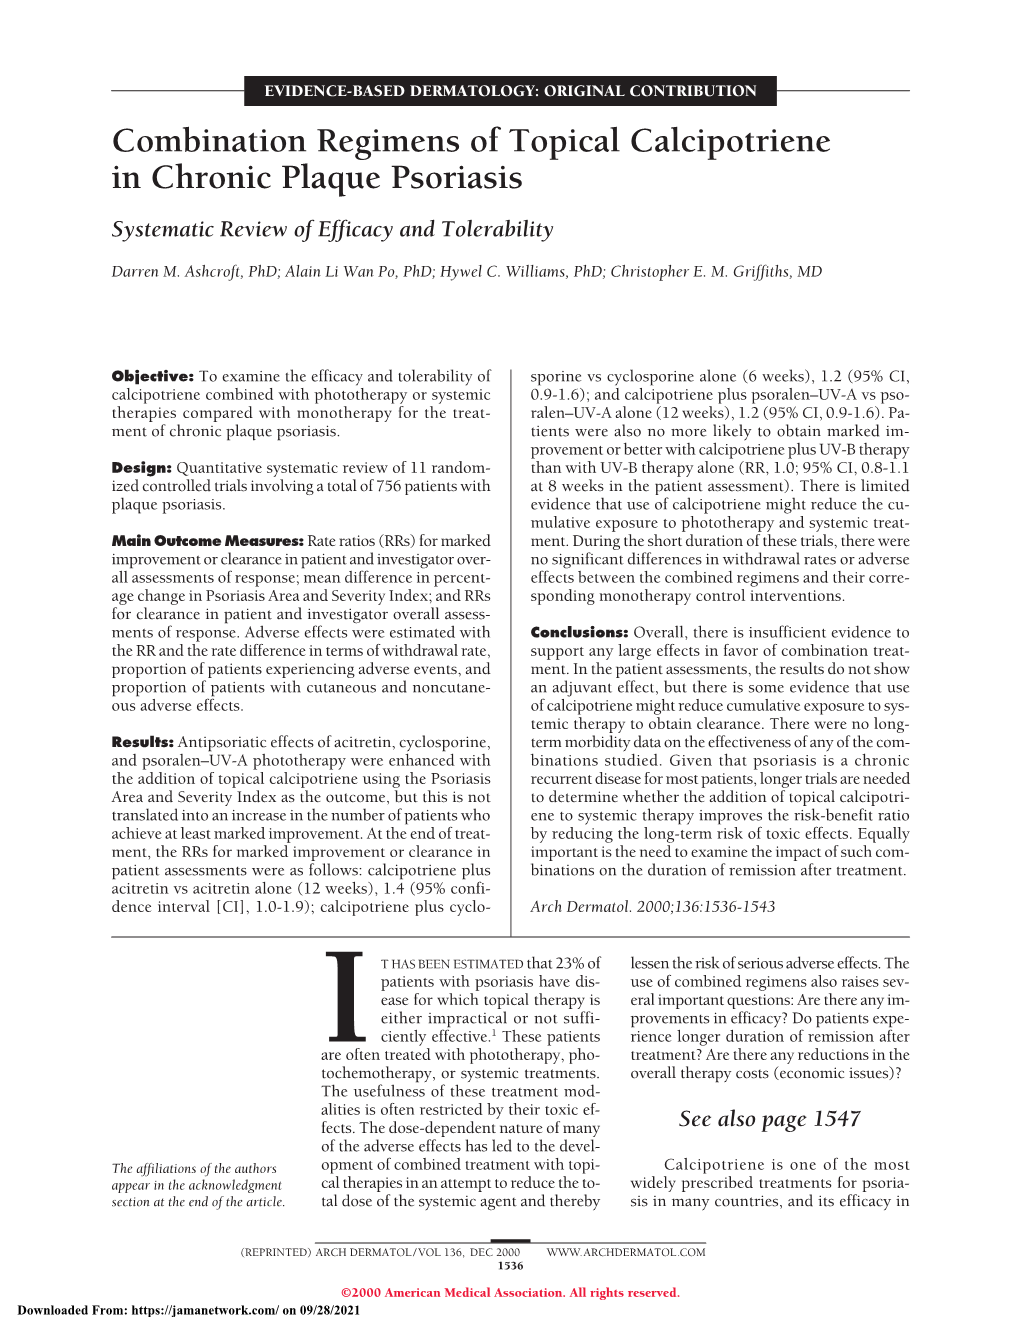 Combination Regimens of Topical Calcipotriene in Chronic Plaque Psoriasis Systematic Review of Efficacy and Tolerability